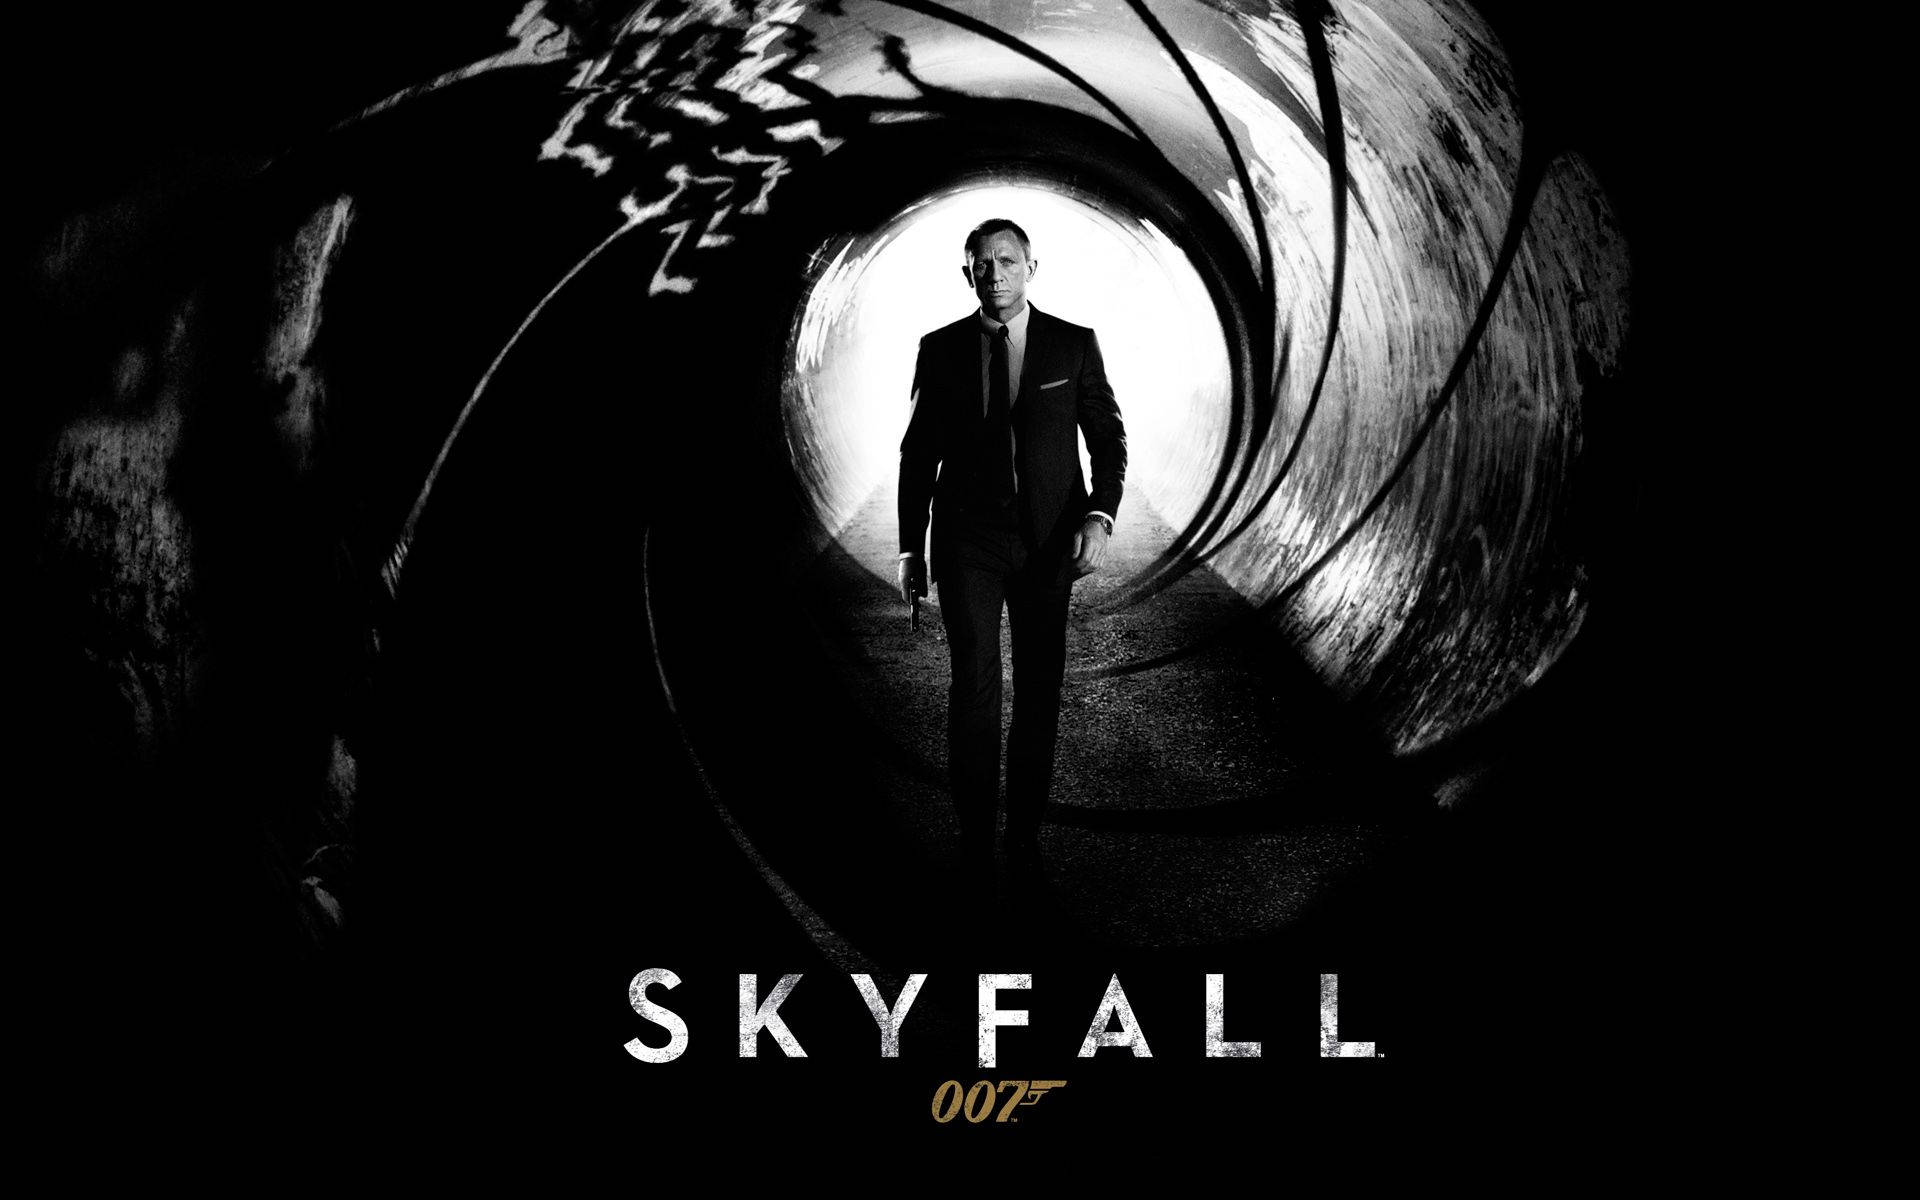 Skyfall: When the past comes back to haunt Wallpaper